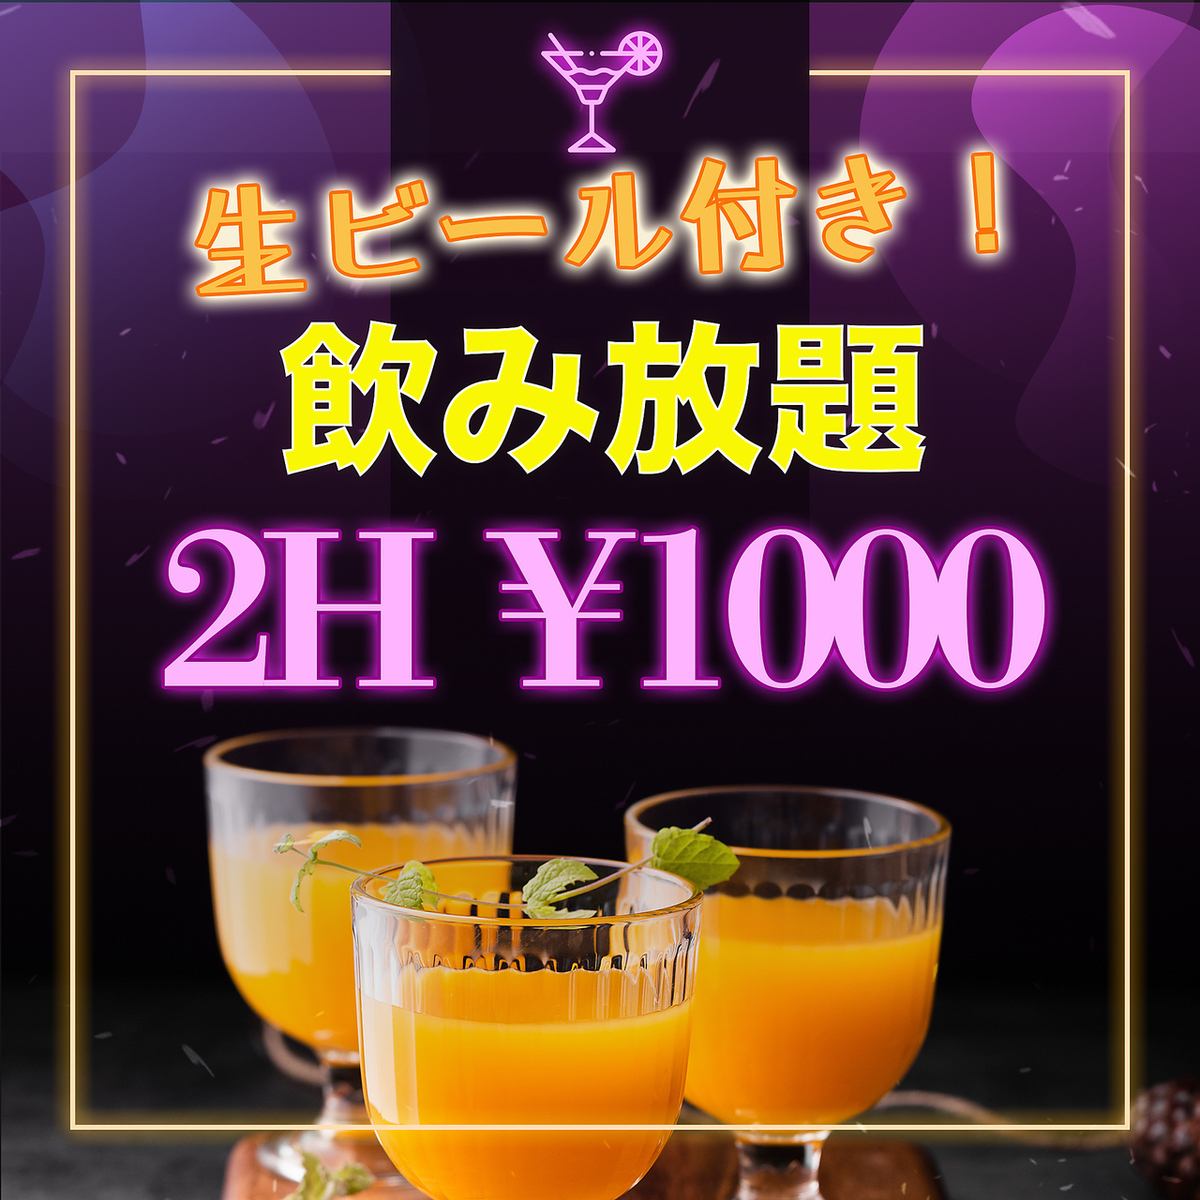 With draft beer! All-you-can-drink! All-you-can-drink 120 minutes 1000 yen S plan!